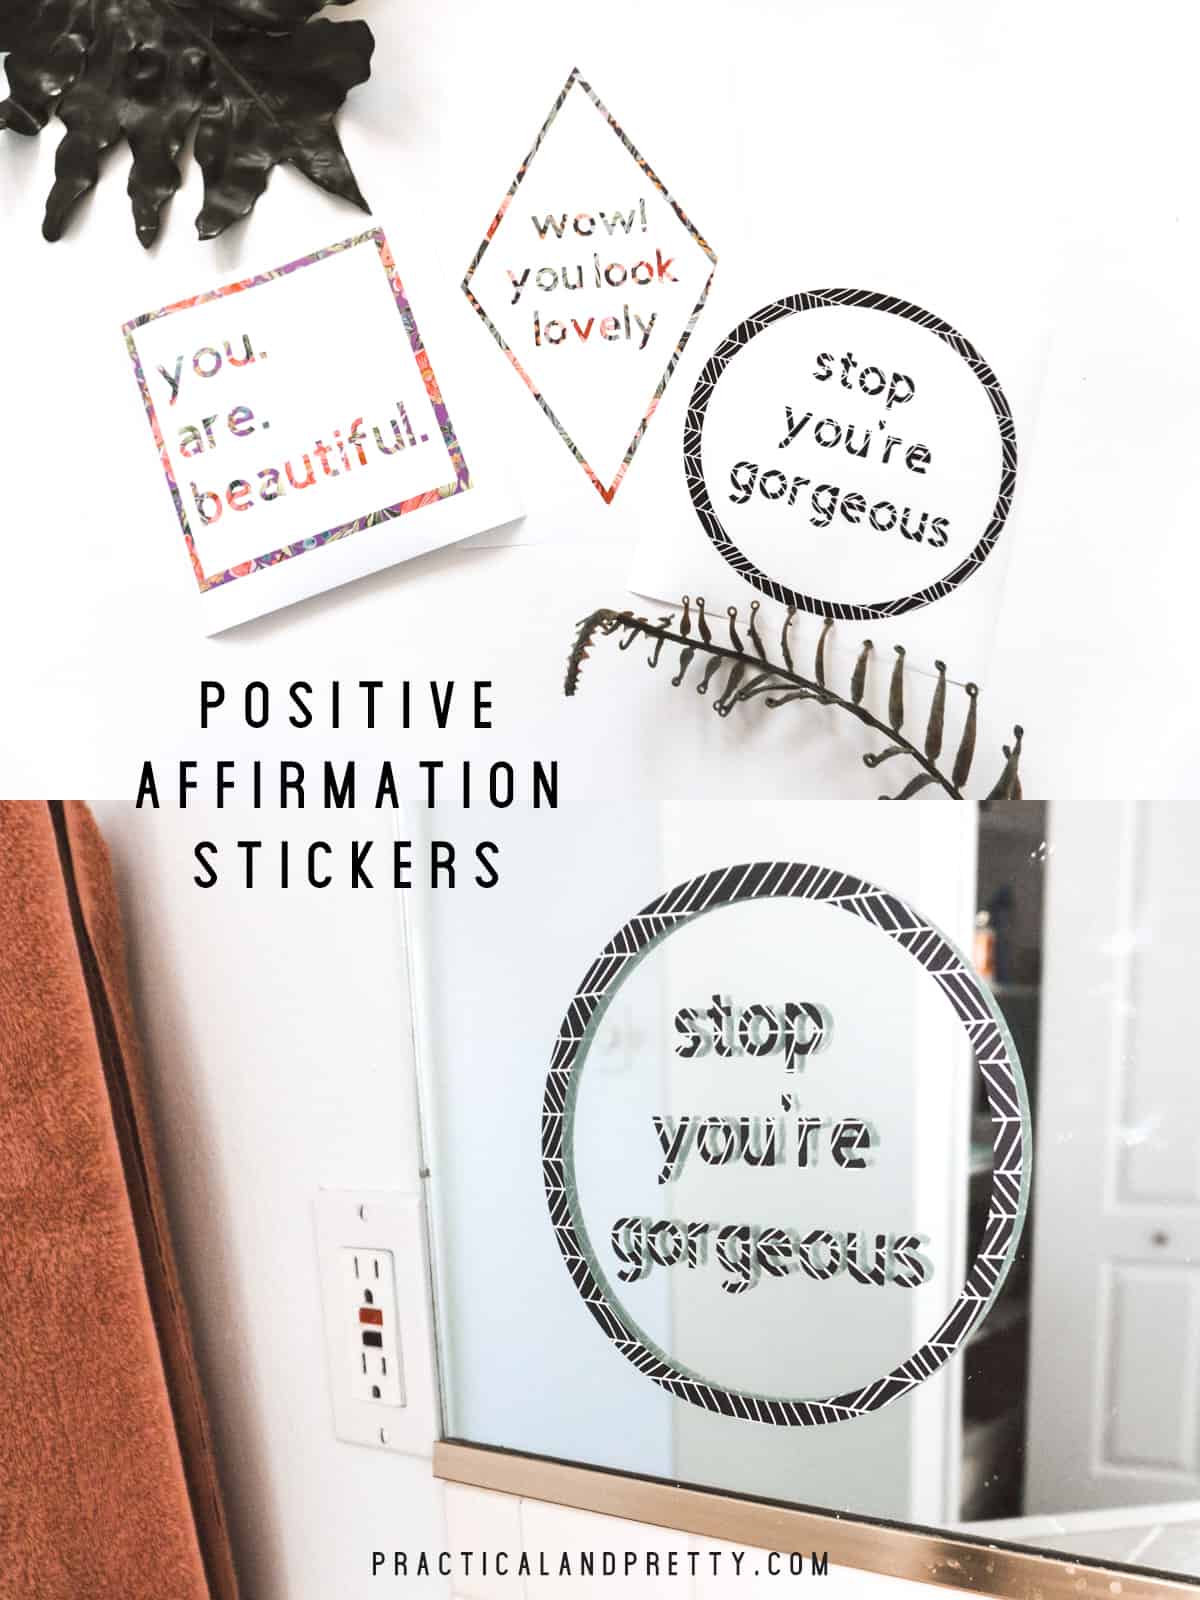 This post has three cut files to share some positive affirmations for women on your car or maybe a mirror to spread some love!